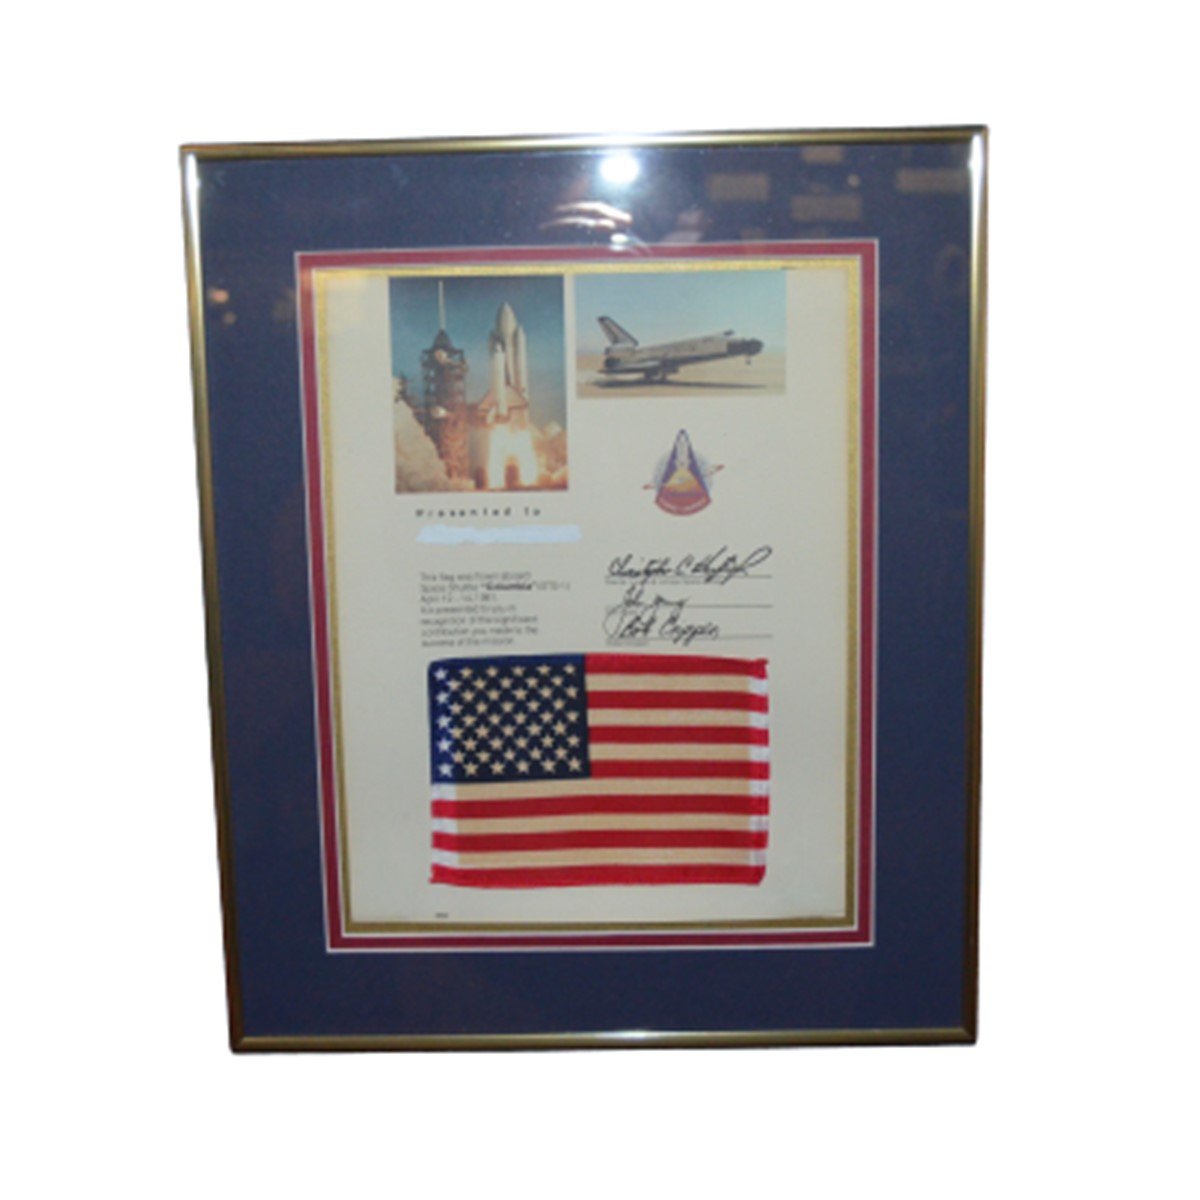 Flown Shuttle Mission STS-1 American Flag